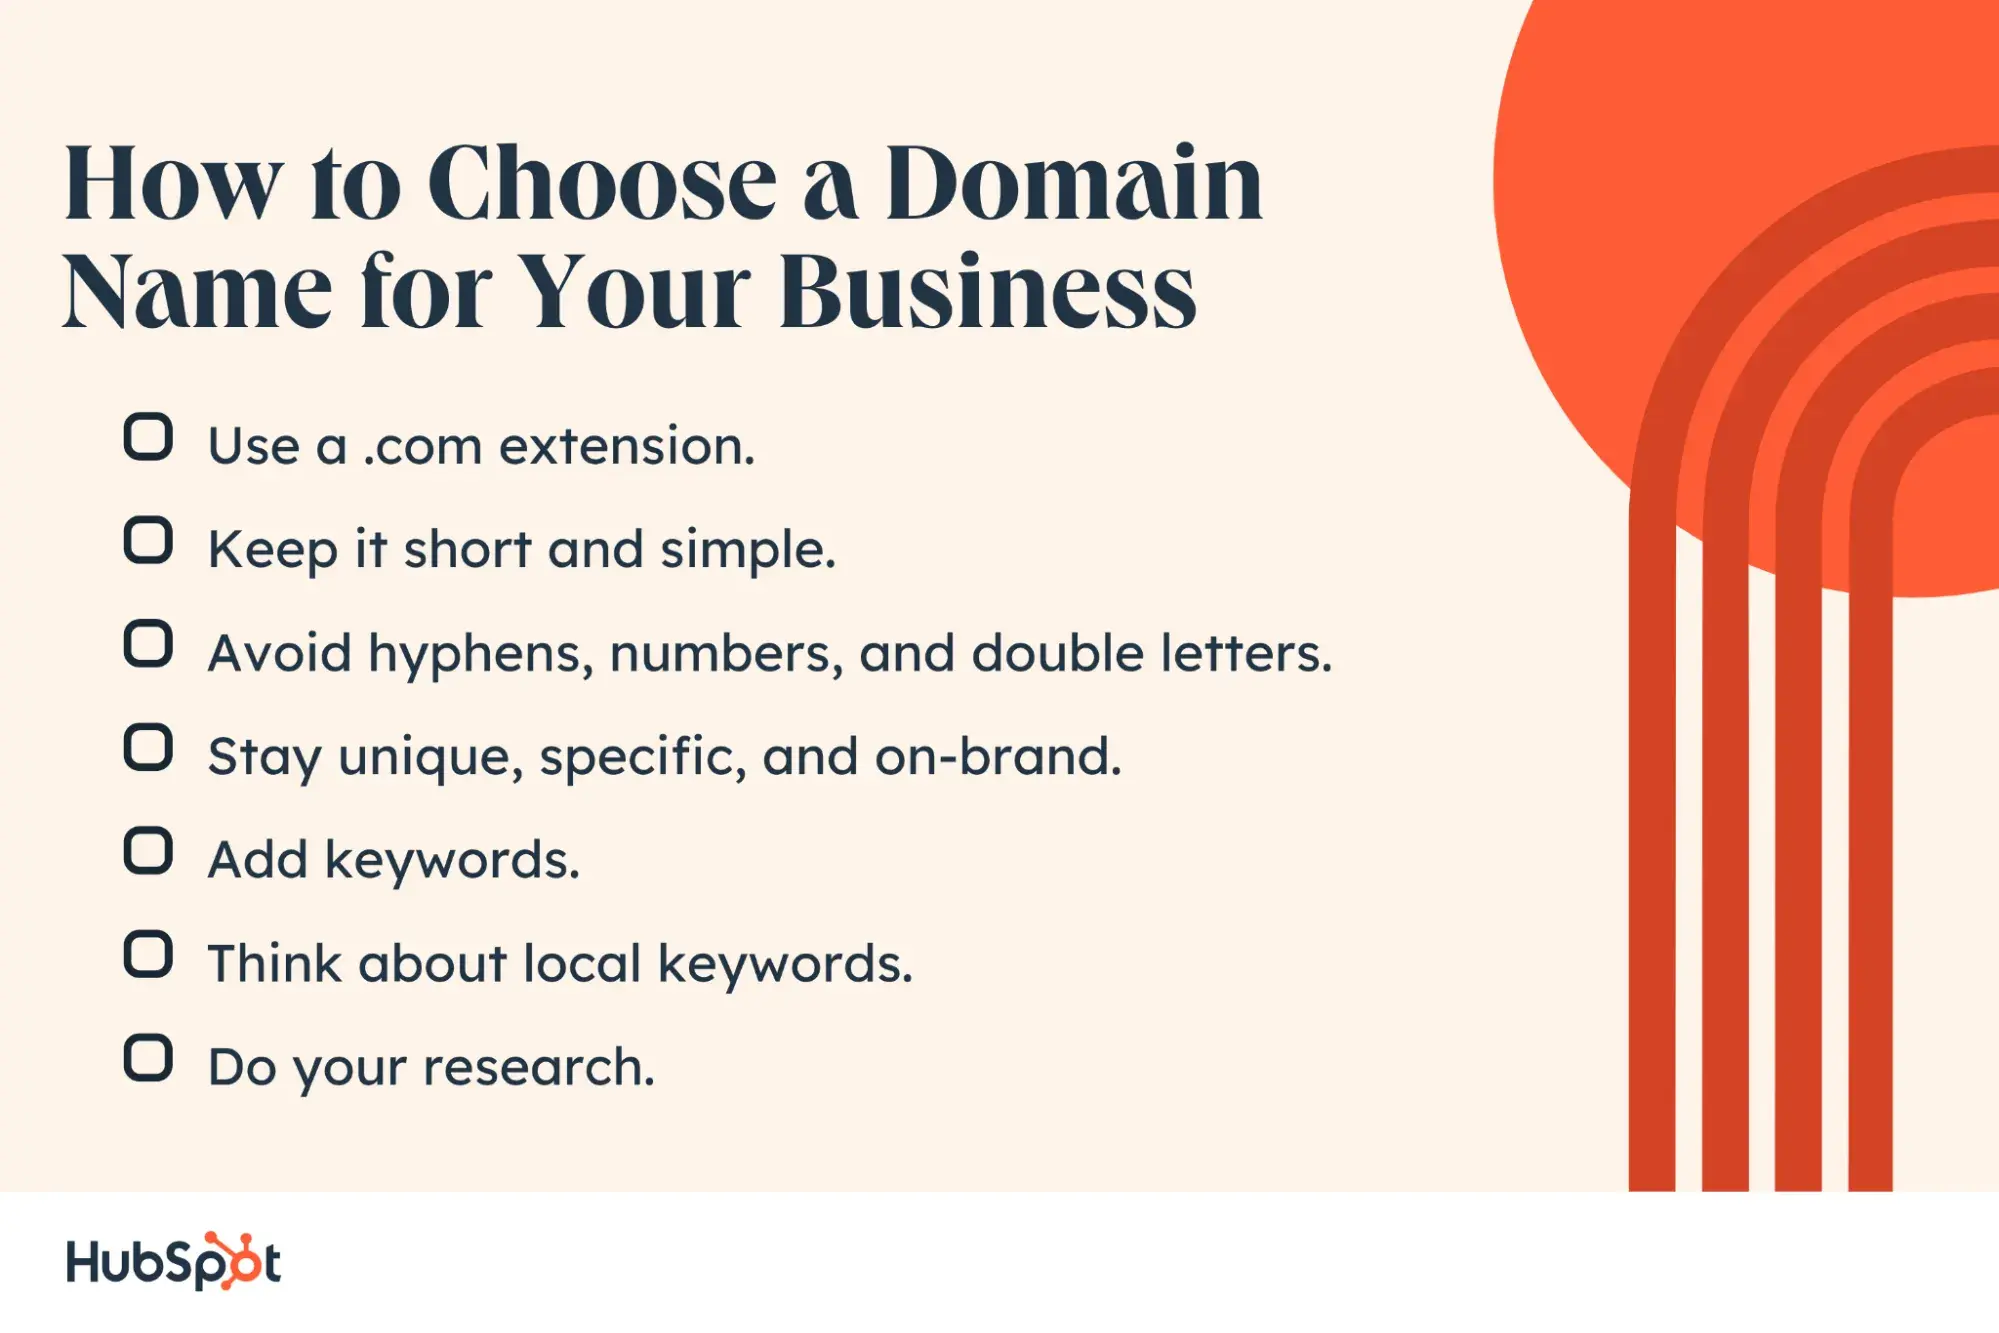 How to Choose a Domain Name for Your Business